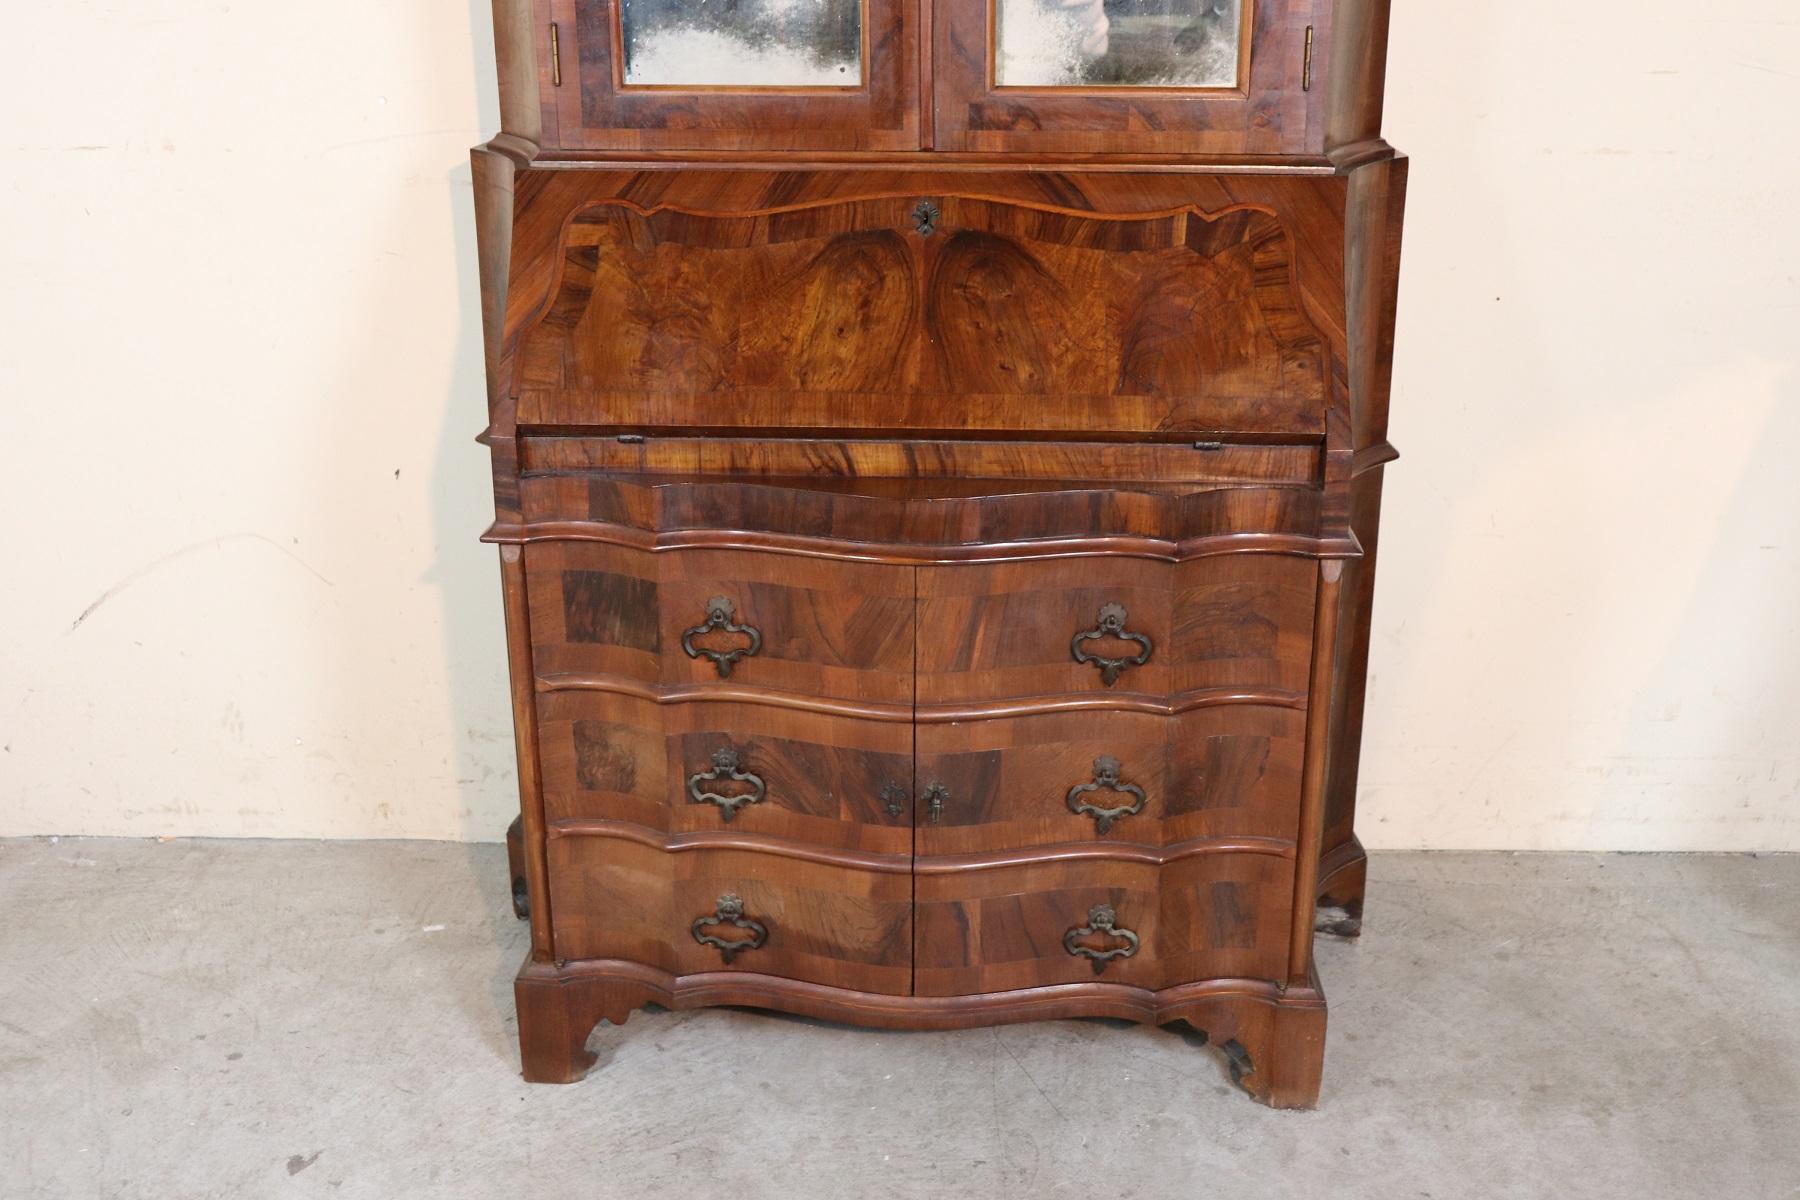 20th Century Italian Louis XIV Style Trumeau, Secretaire in Walnut and Burl 
Double body furniture in carved walnut and burl wood of excellent quality. Trumeau with three external drawers of good capacity. Interior of the fall-front with four small